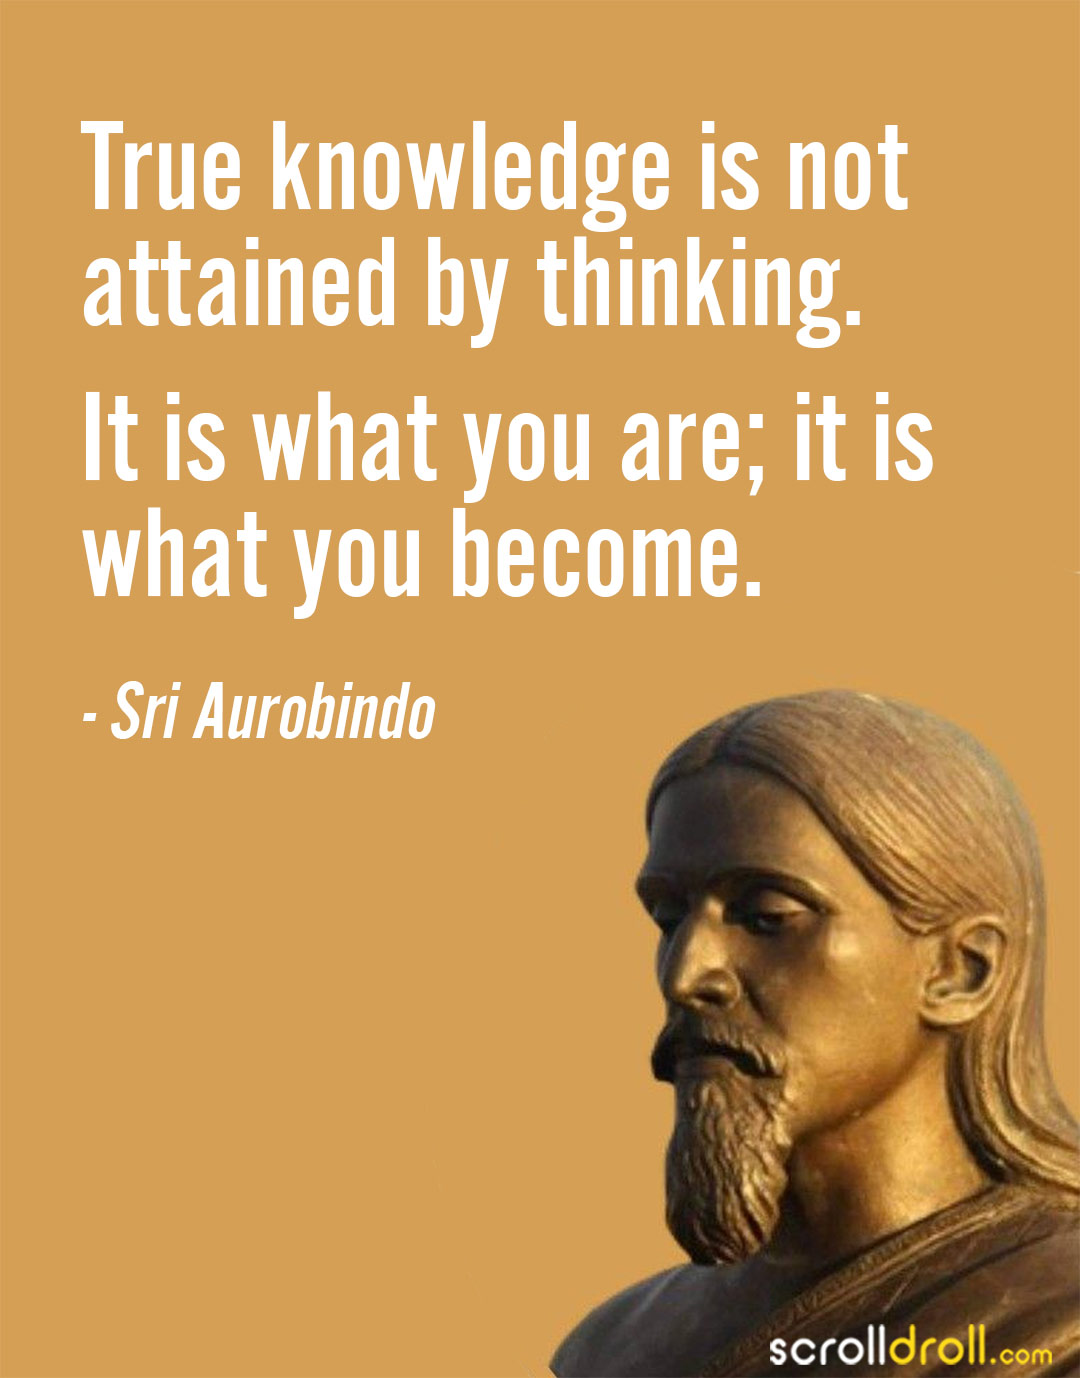 15 Best Sri Aurobindo Quotes On Love, Education, Peace & Life